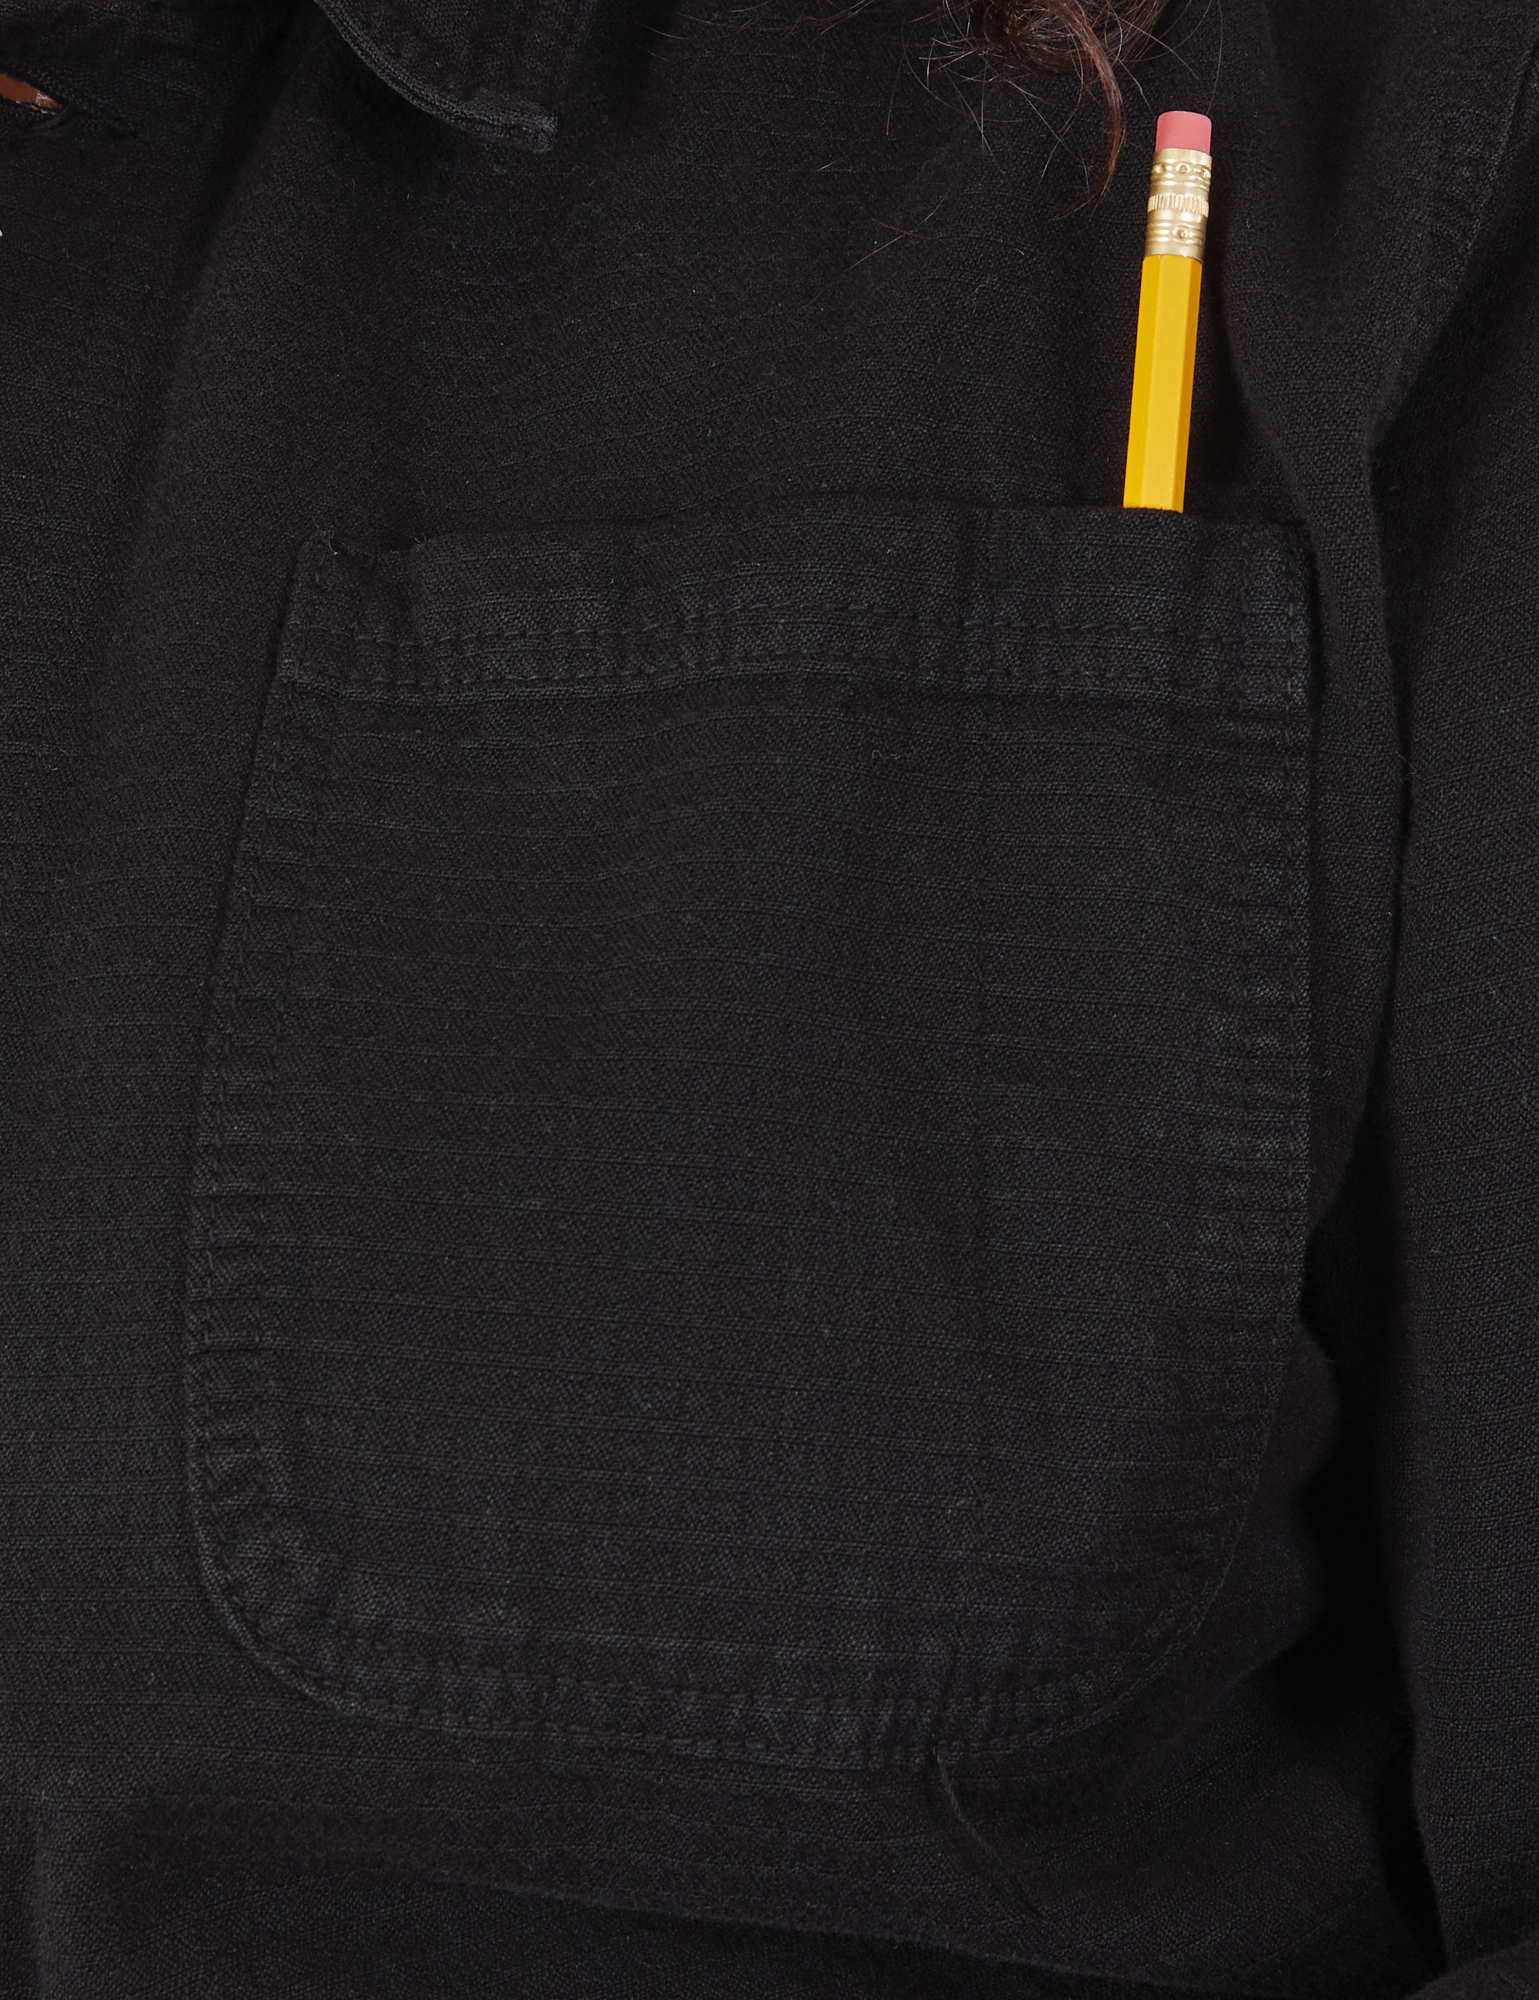 Field Coat in Basic Black front pocket close up. Pencil is in the pen pocket slot.